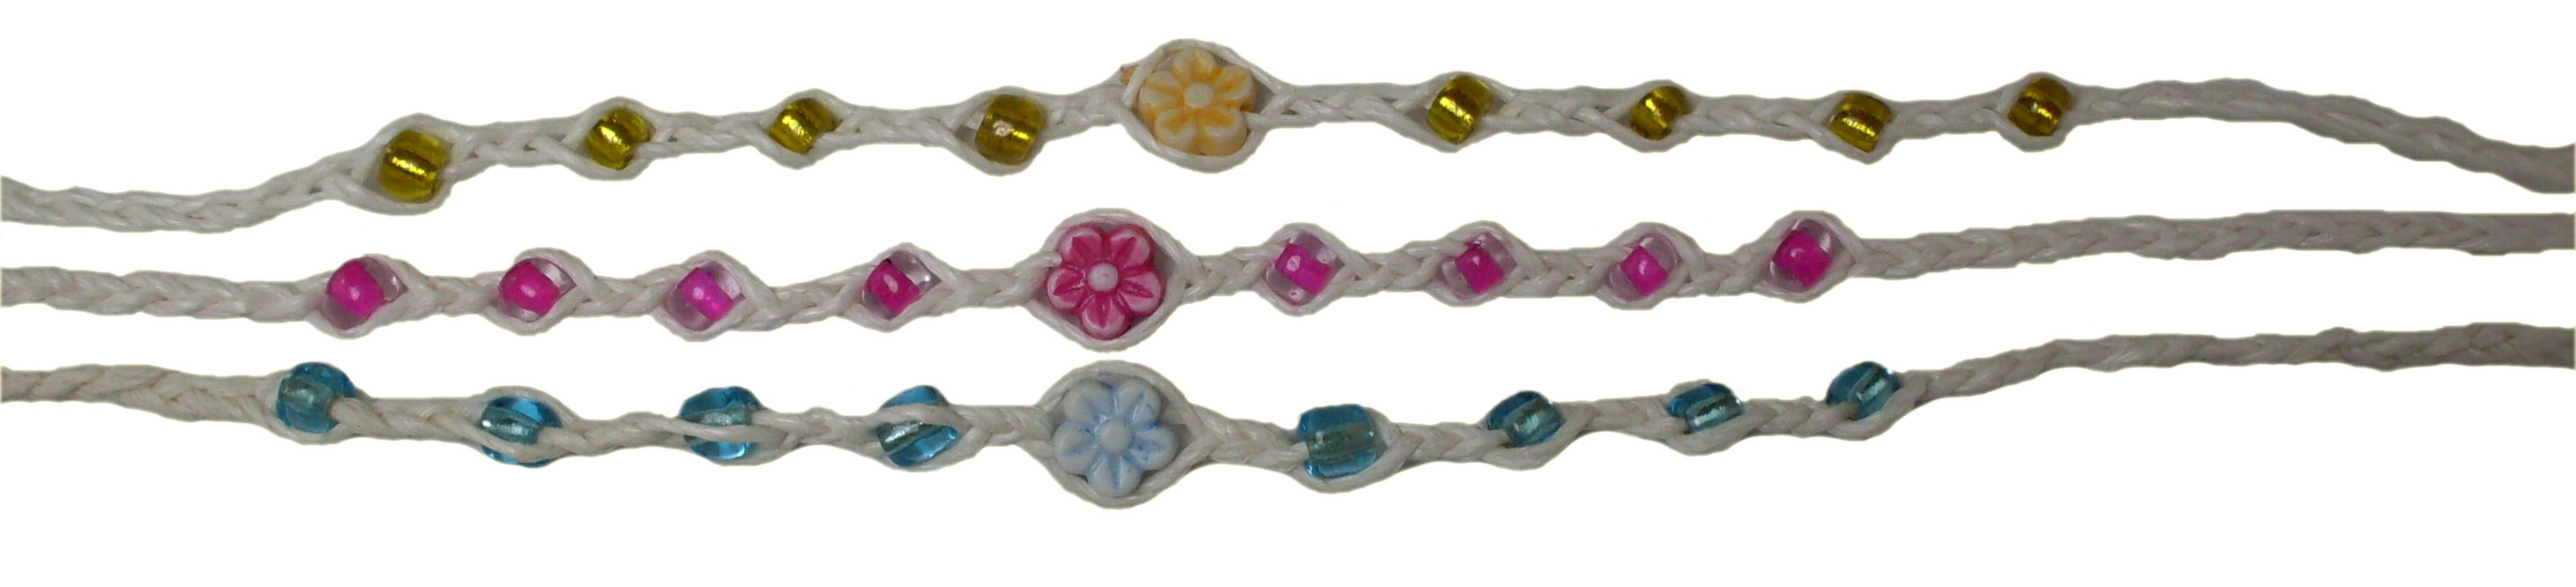 Colored Bead With Flower Wishlet Bracelet #3